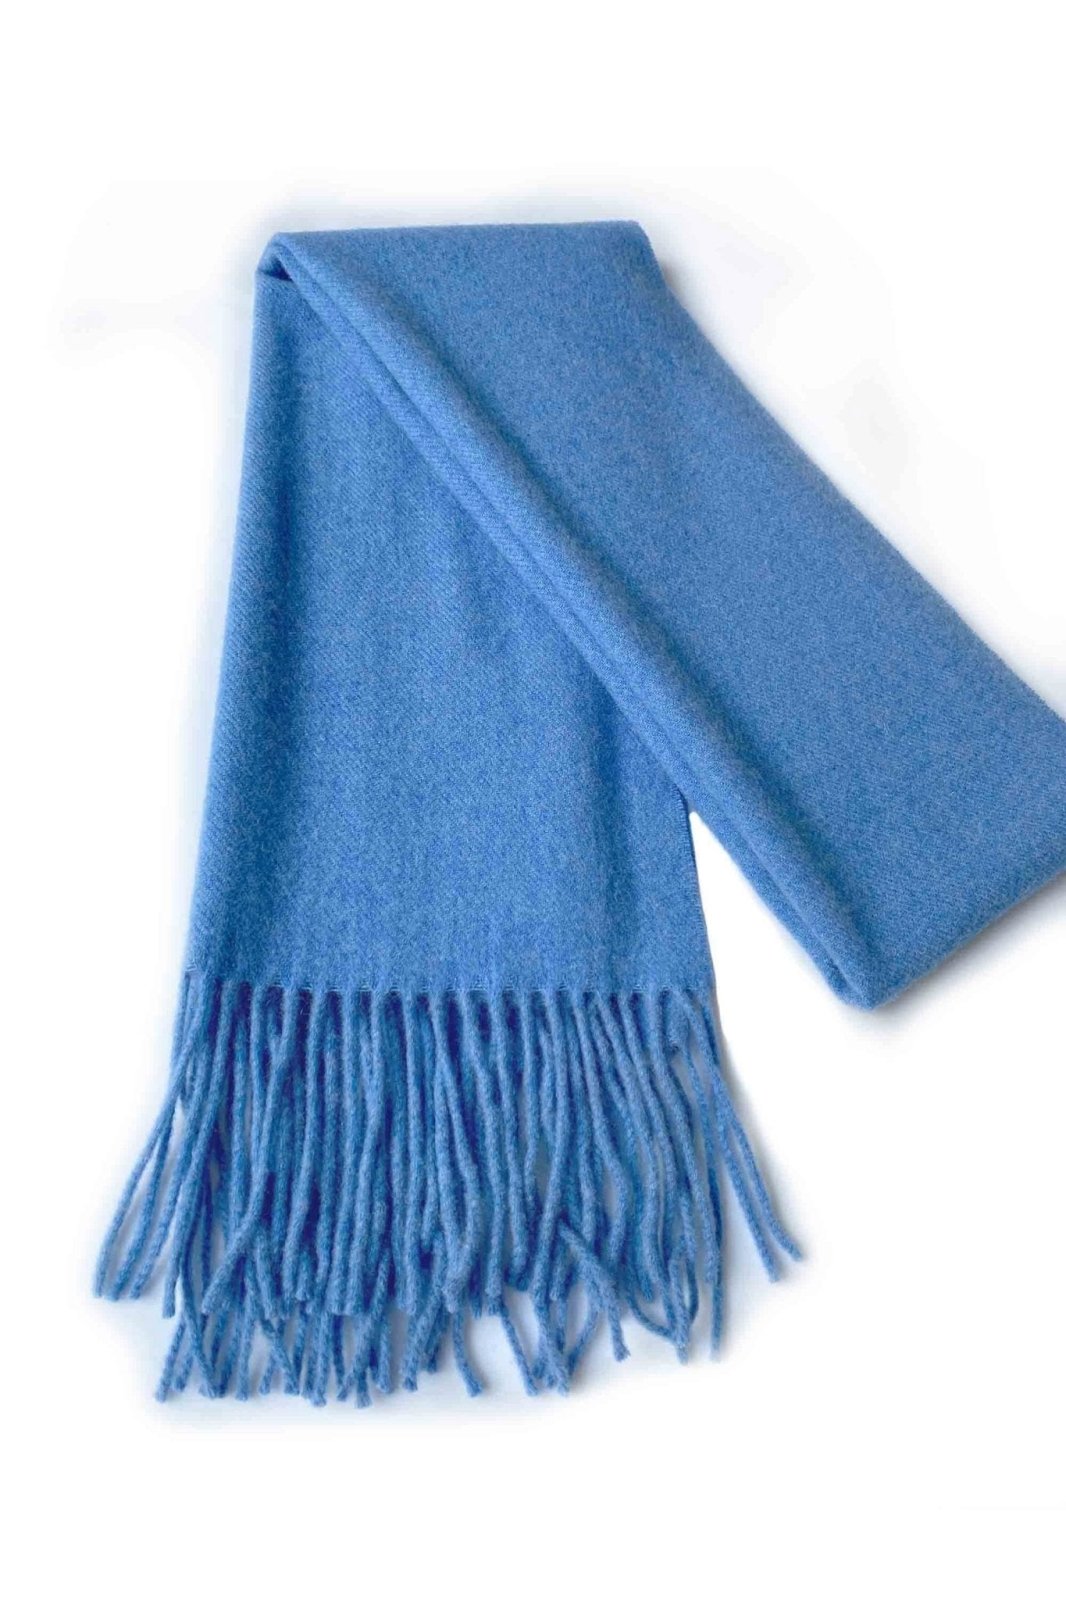 Unisex cashmere scarf with fringes in blue - SEMON Cashmere